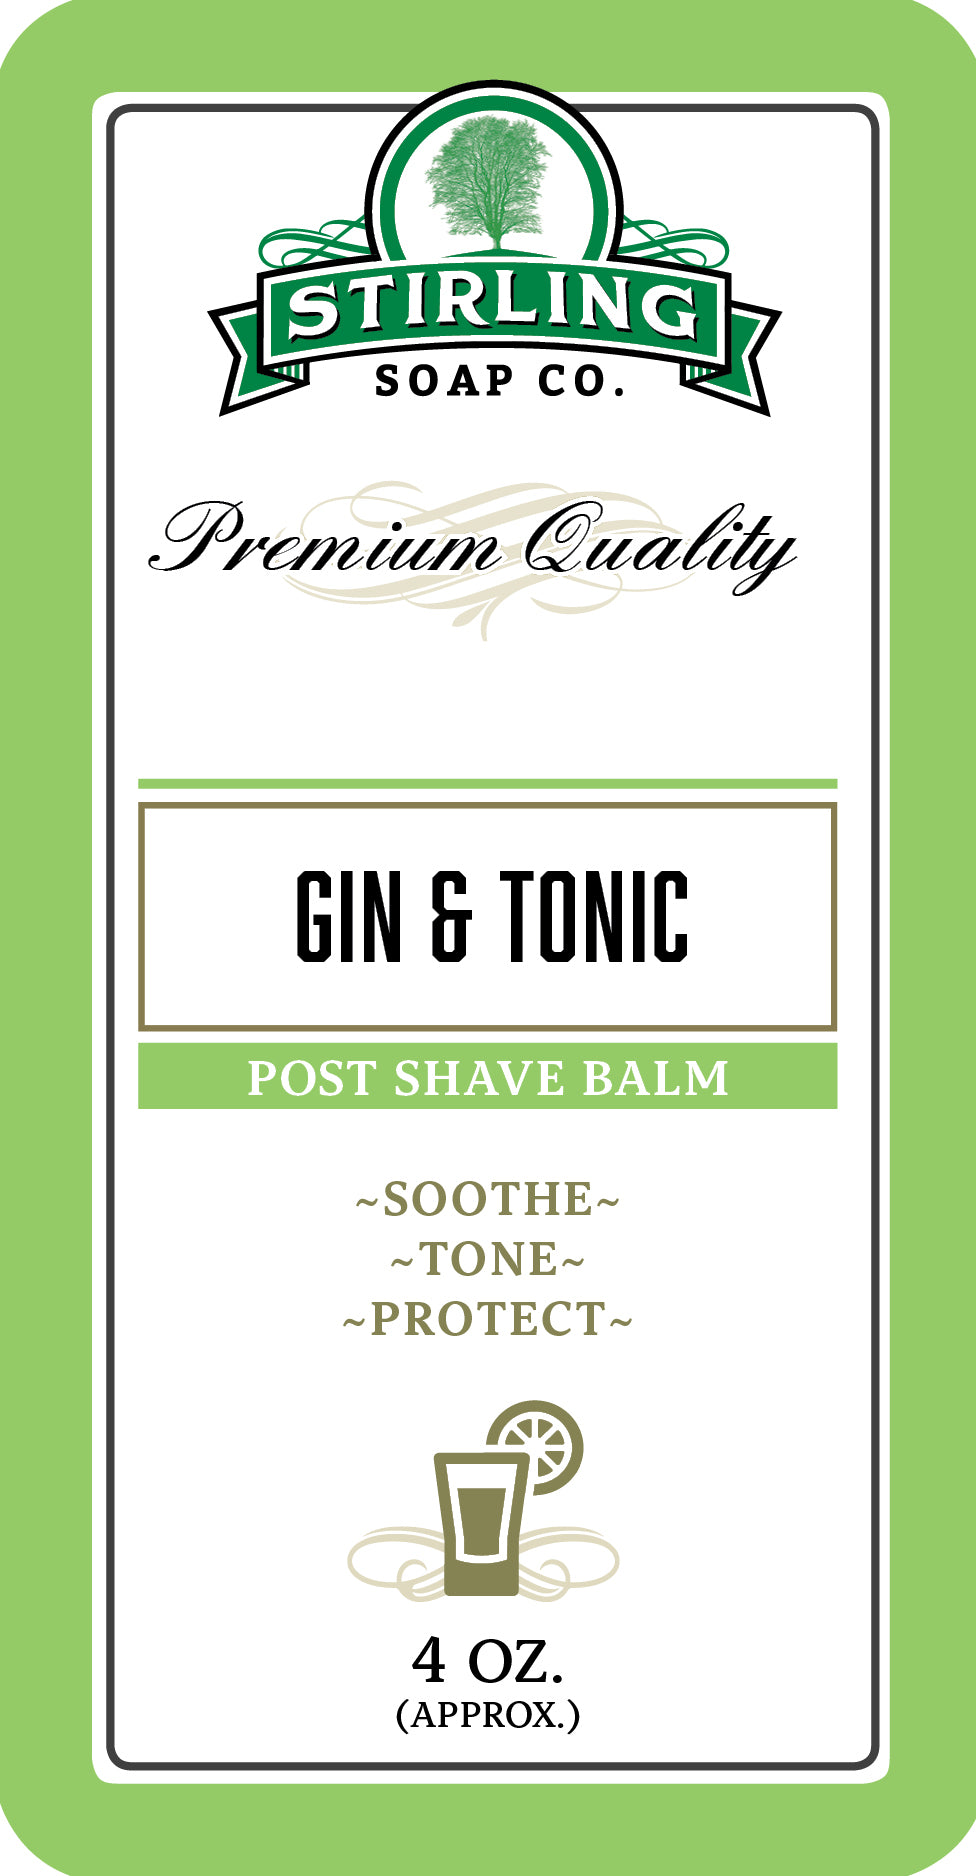 Gin & Tonic - Post Shave Balm